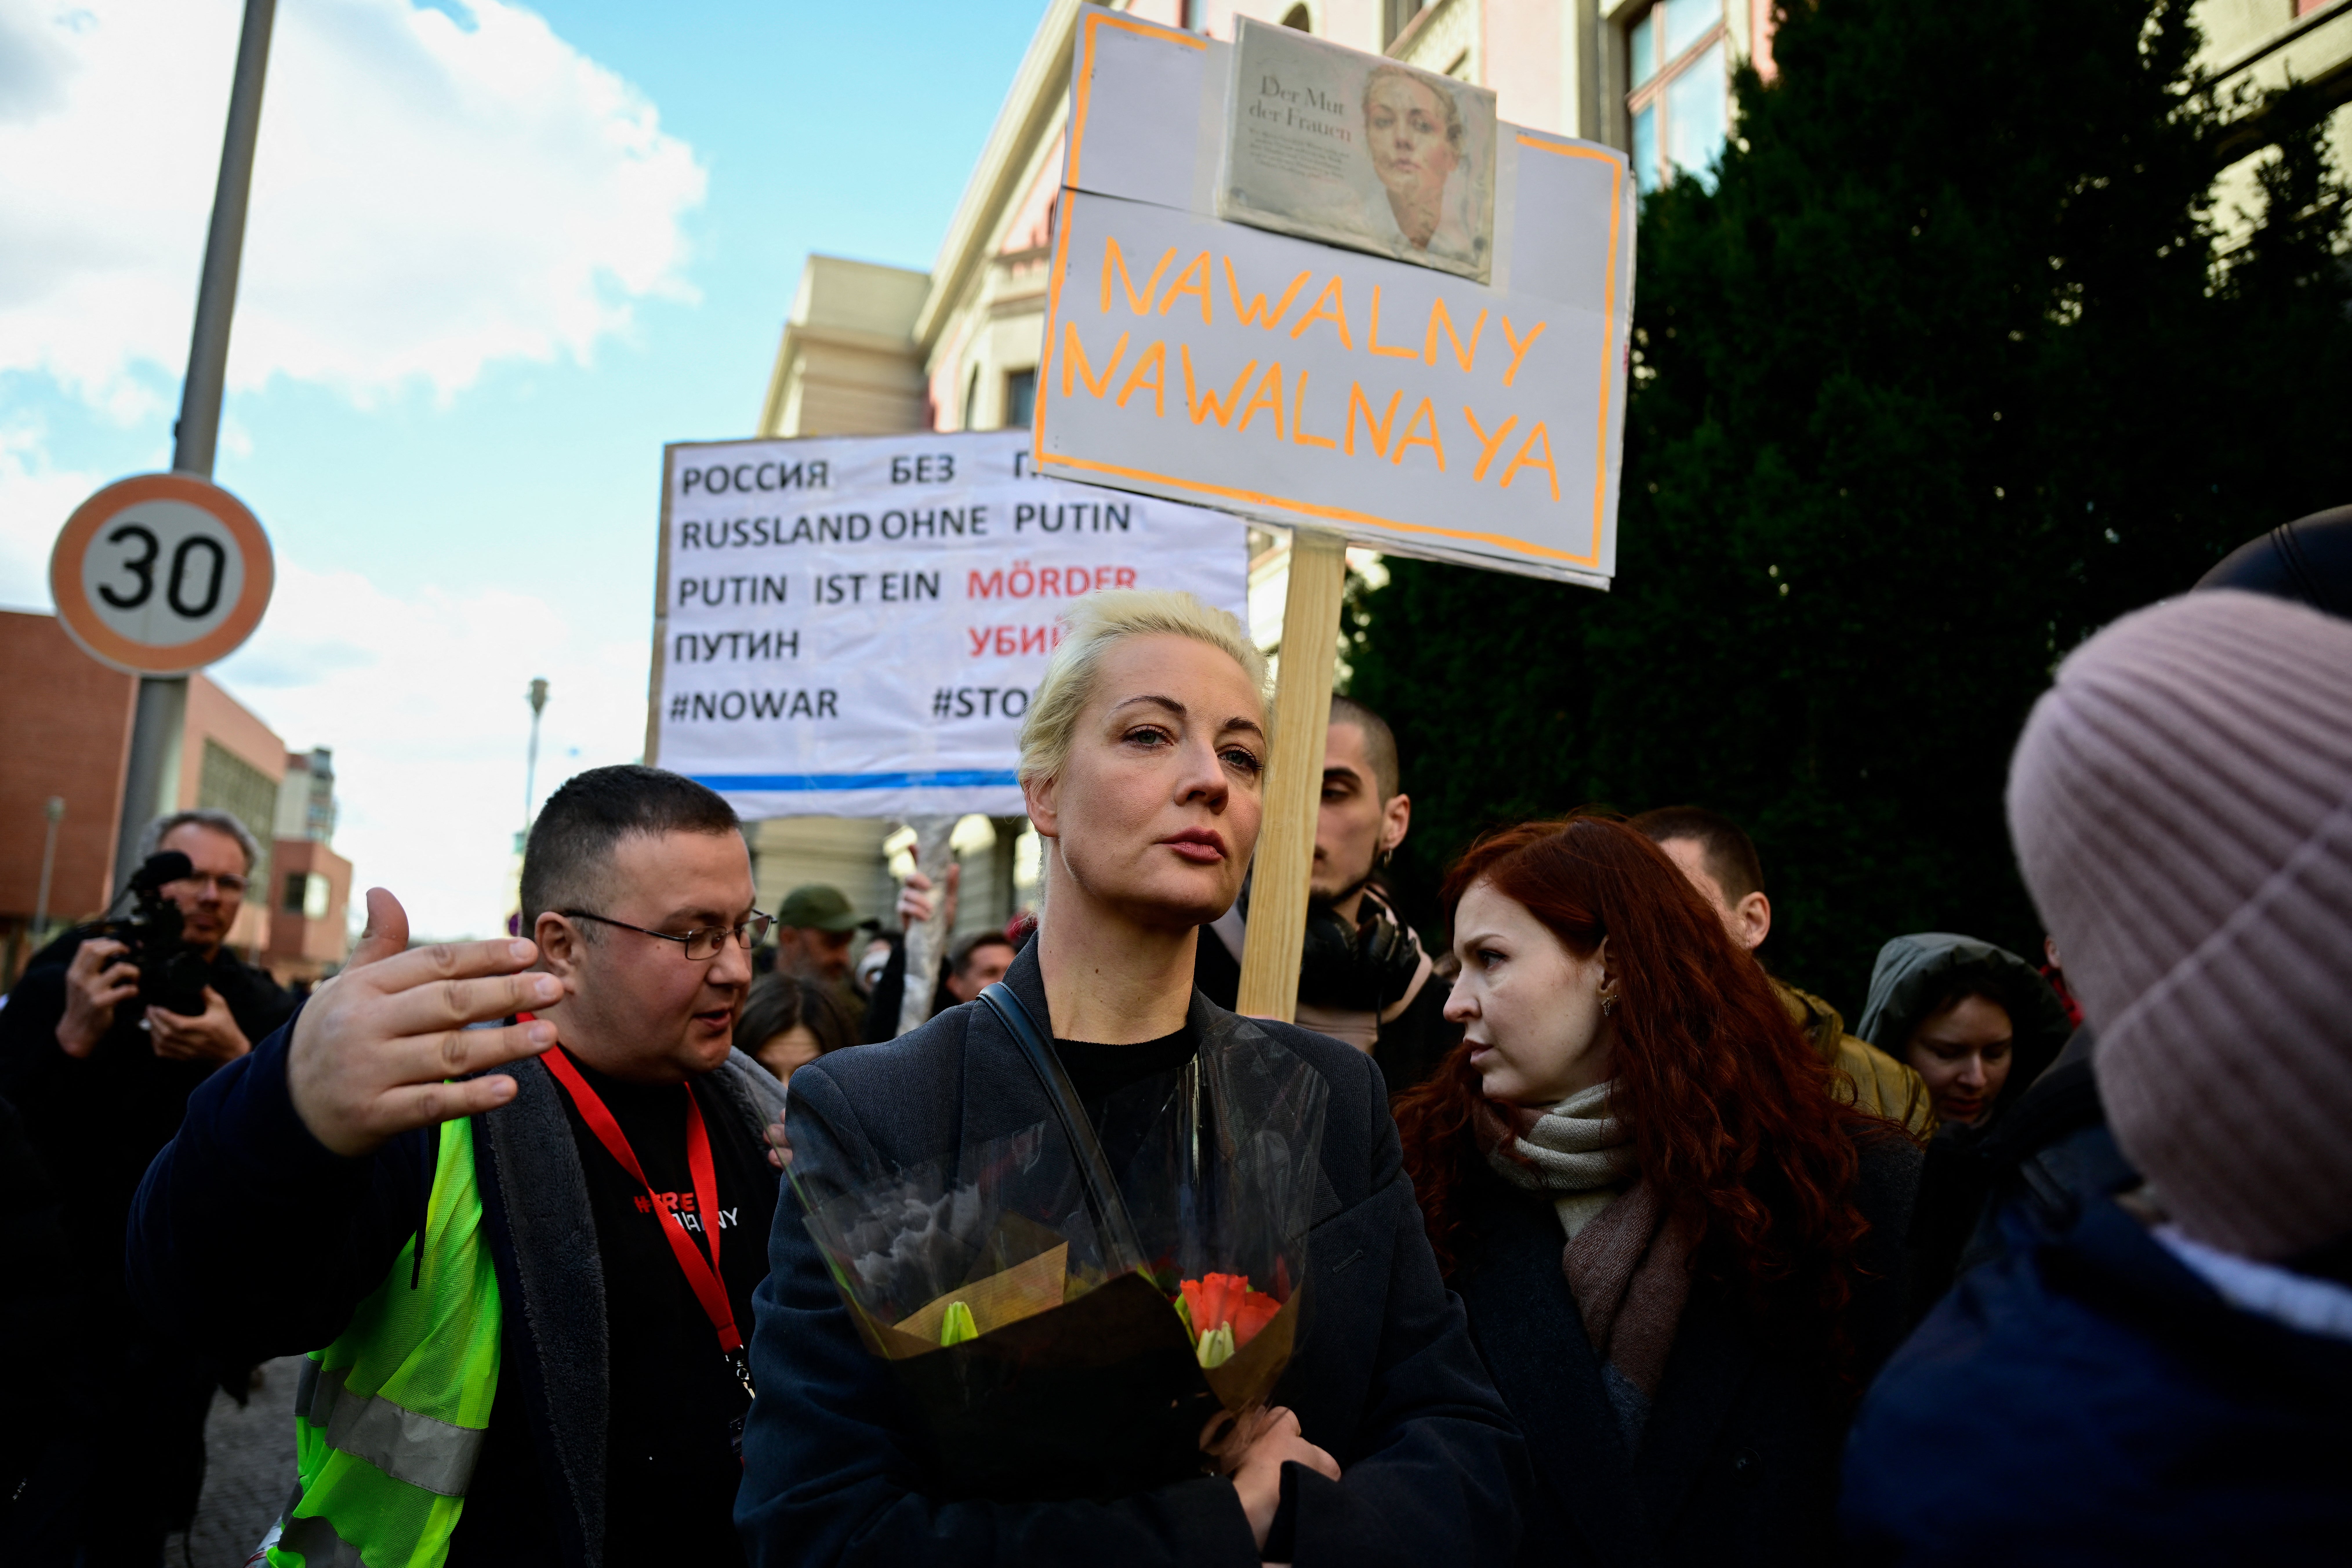 Yulia Navalnaya, widow of the late Kremlin opposition leader Alexei Navalny, attends a rally next to the Russian embassy in Berlin